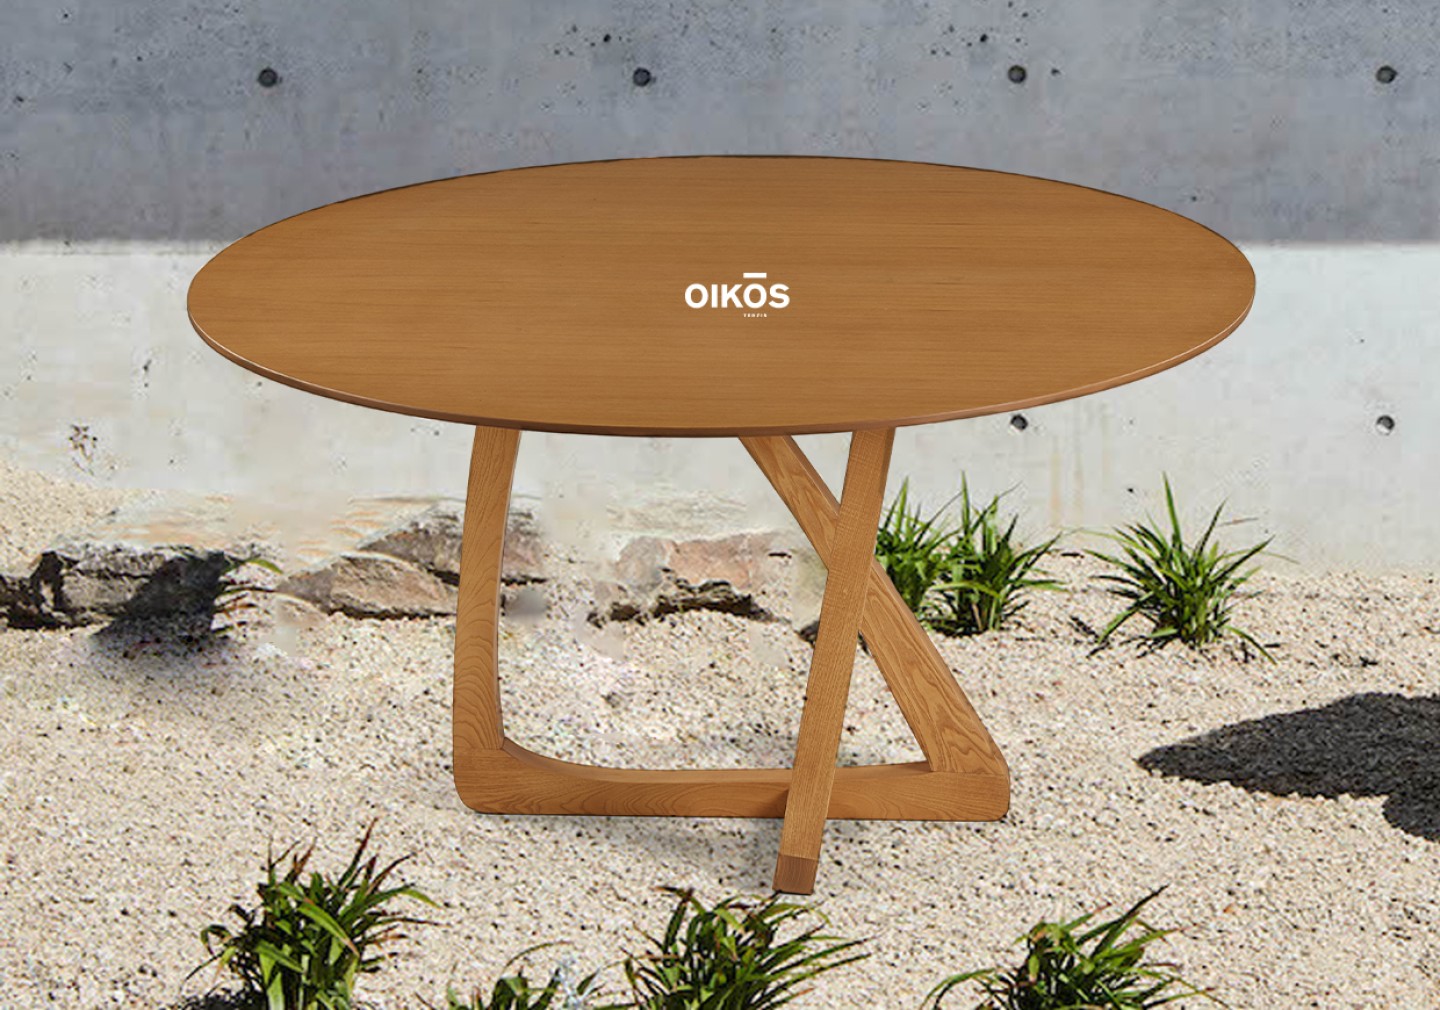 THE X ORION DINNER TABLE